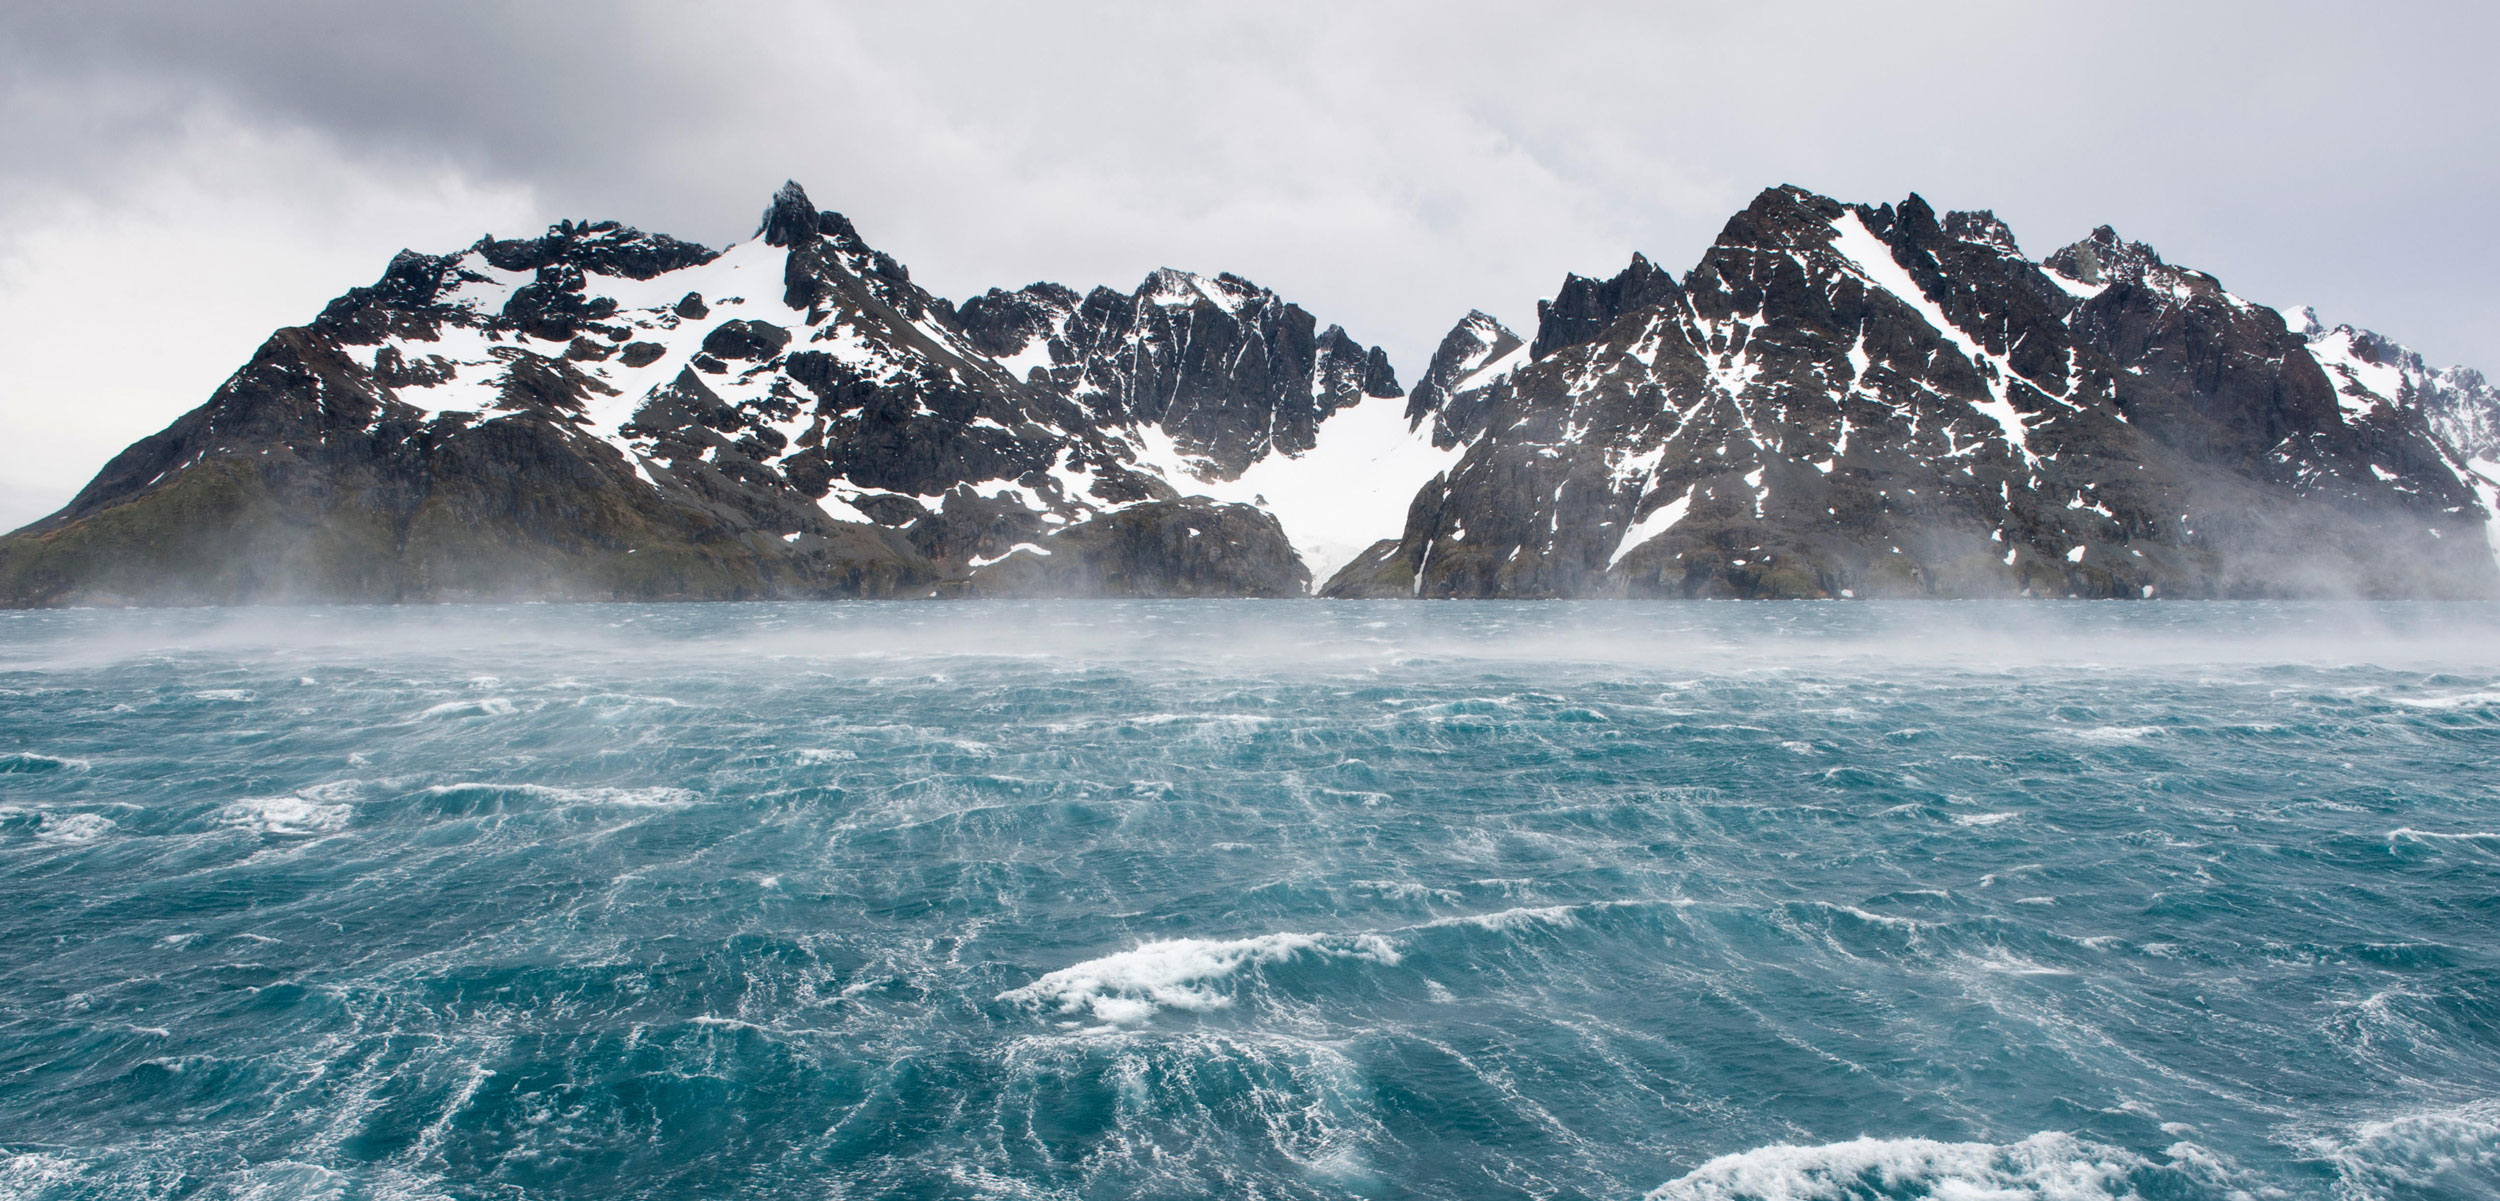 Stormy waters and rugged mountains, Drygalski Fjord, South Georgia Island, Antarctica